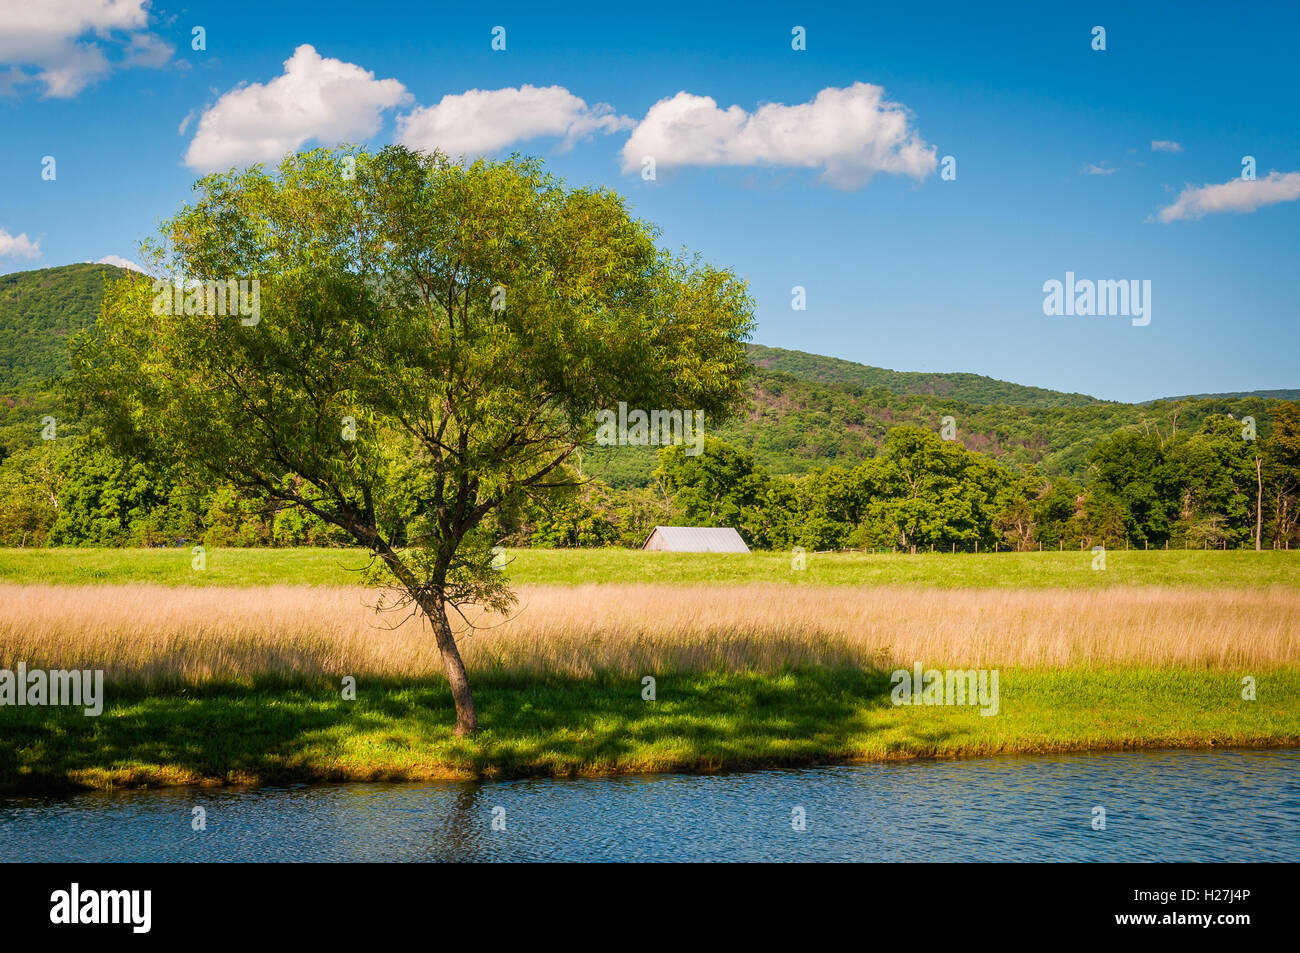 Pond and tree in the rural Shenandoah Valley of Virginia. Stock Photo